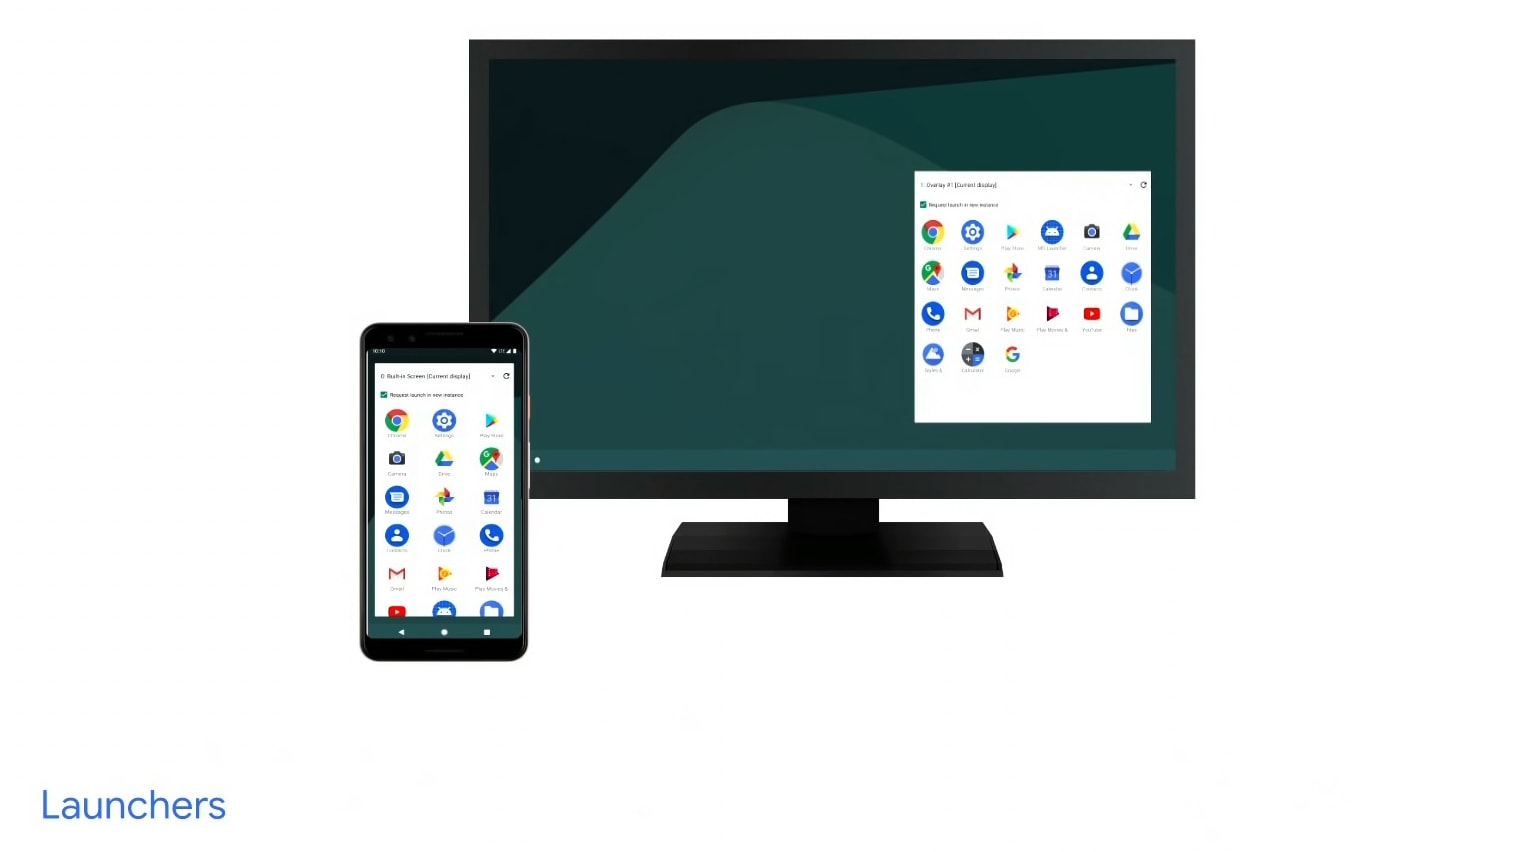 An image, supplied by Google, of a smartphone's display mirrored in desktop mode with Android Q.